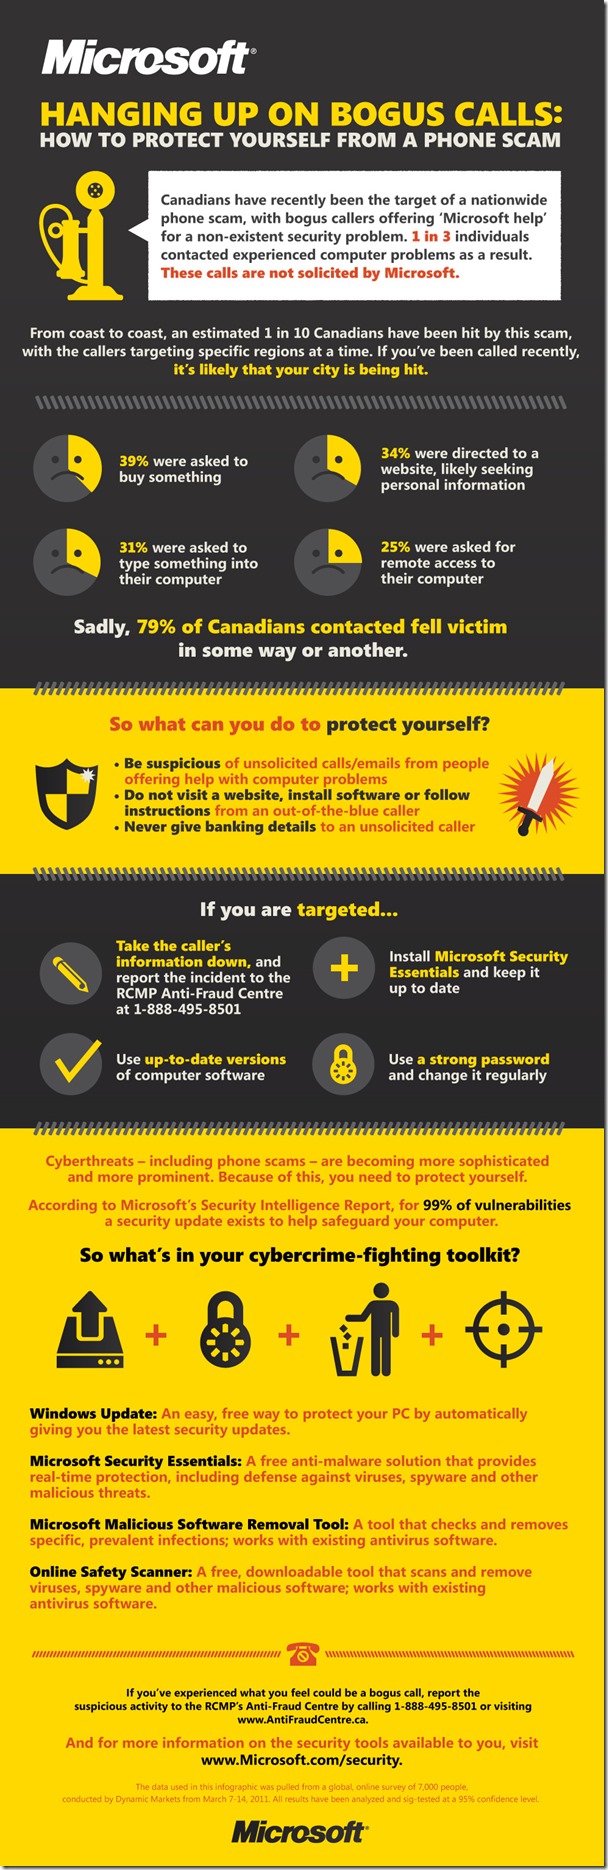 7750.1513_MSFT-PhoneScam-Infographic-FINAL_thumb_4A7AE9D9